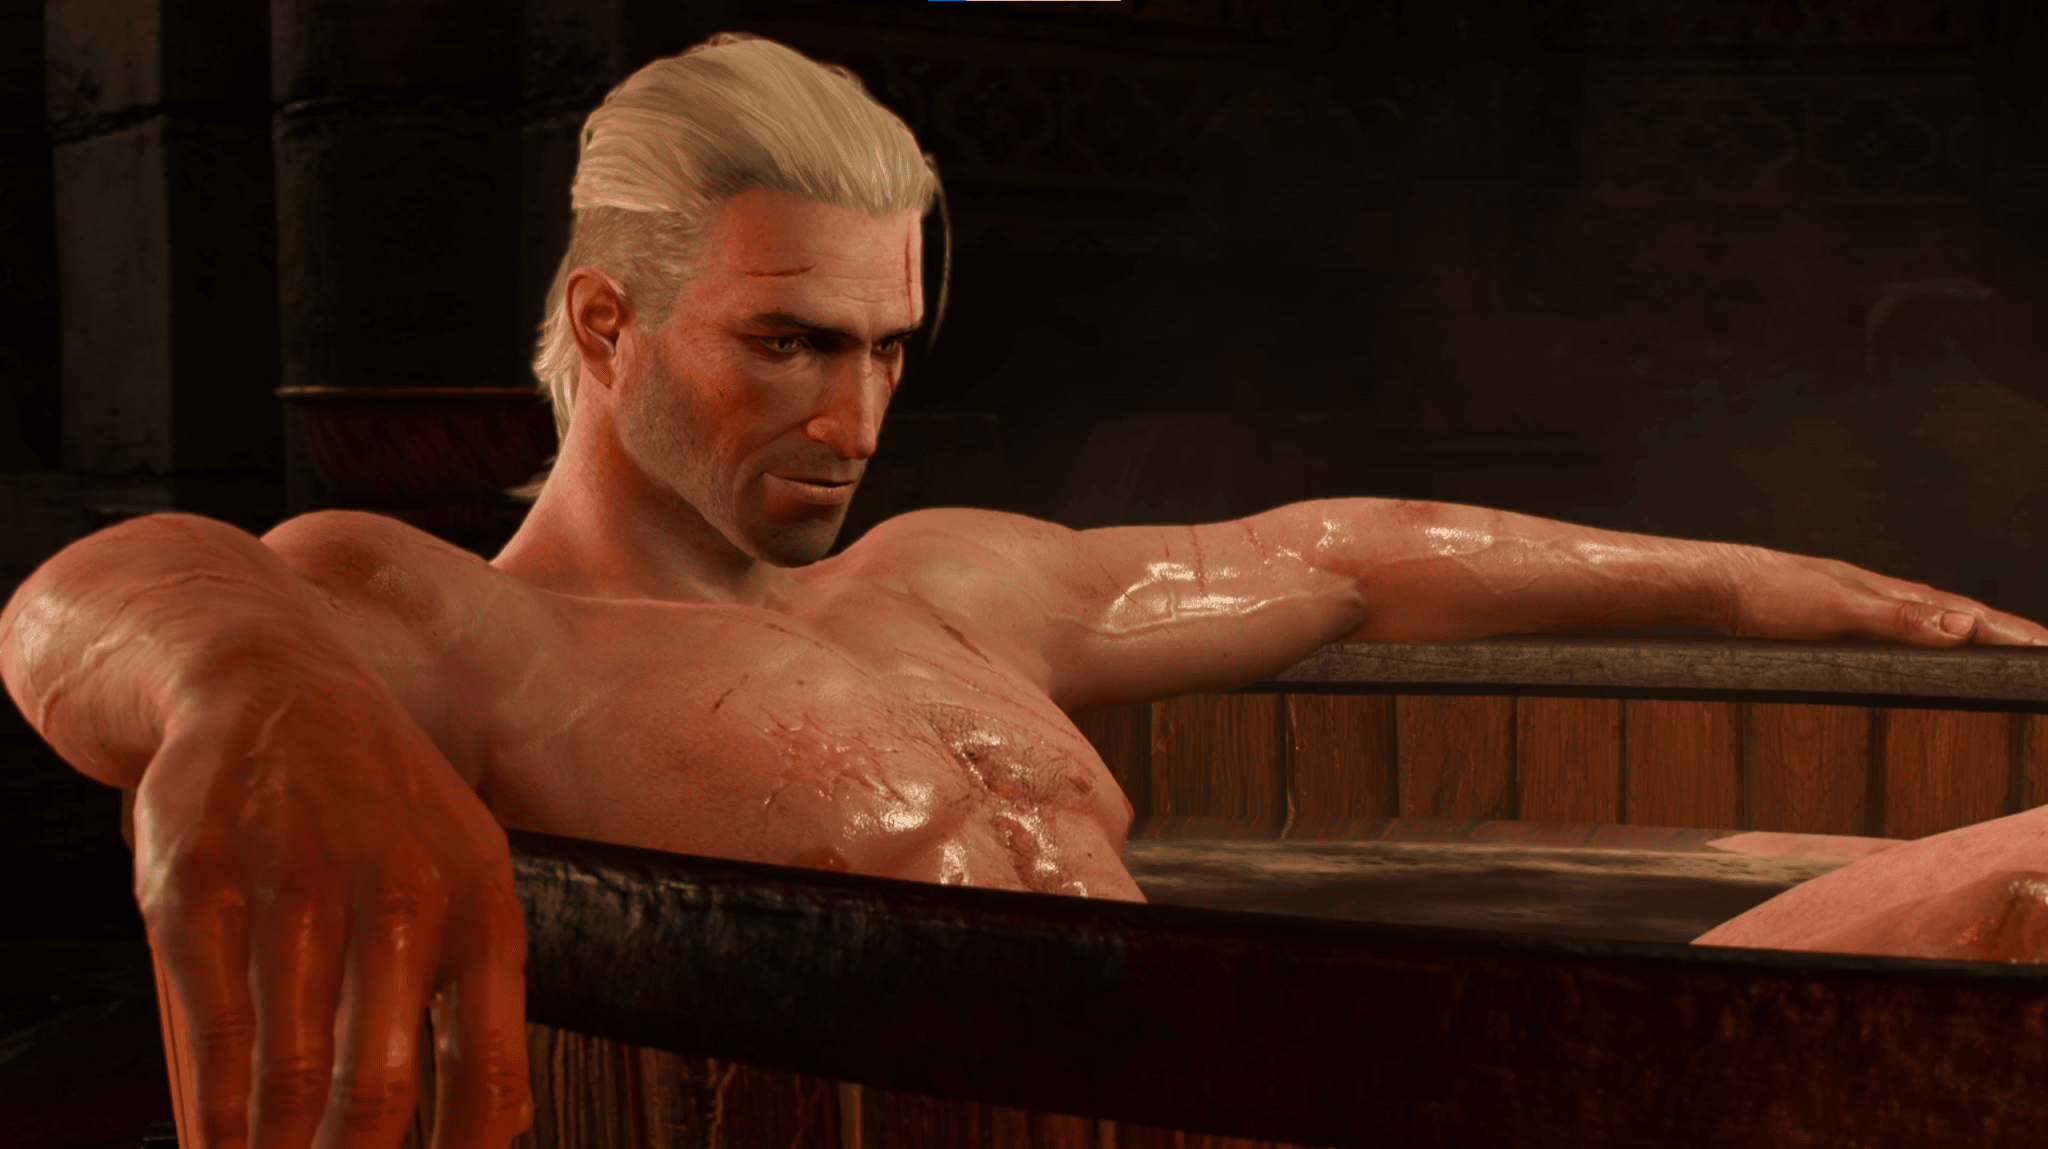 The Witcher 3's protagonist Geralt, bathing in the game's opening scene.